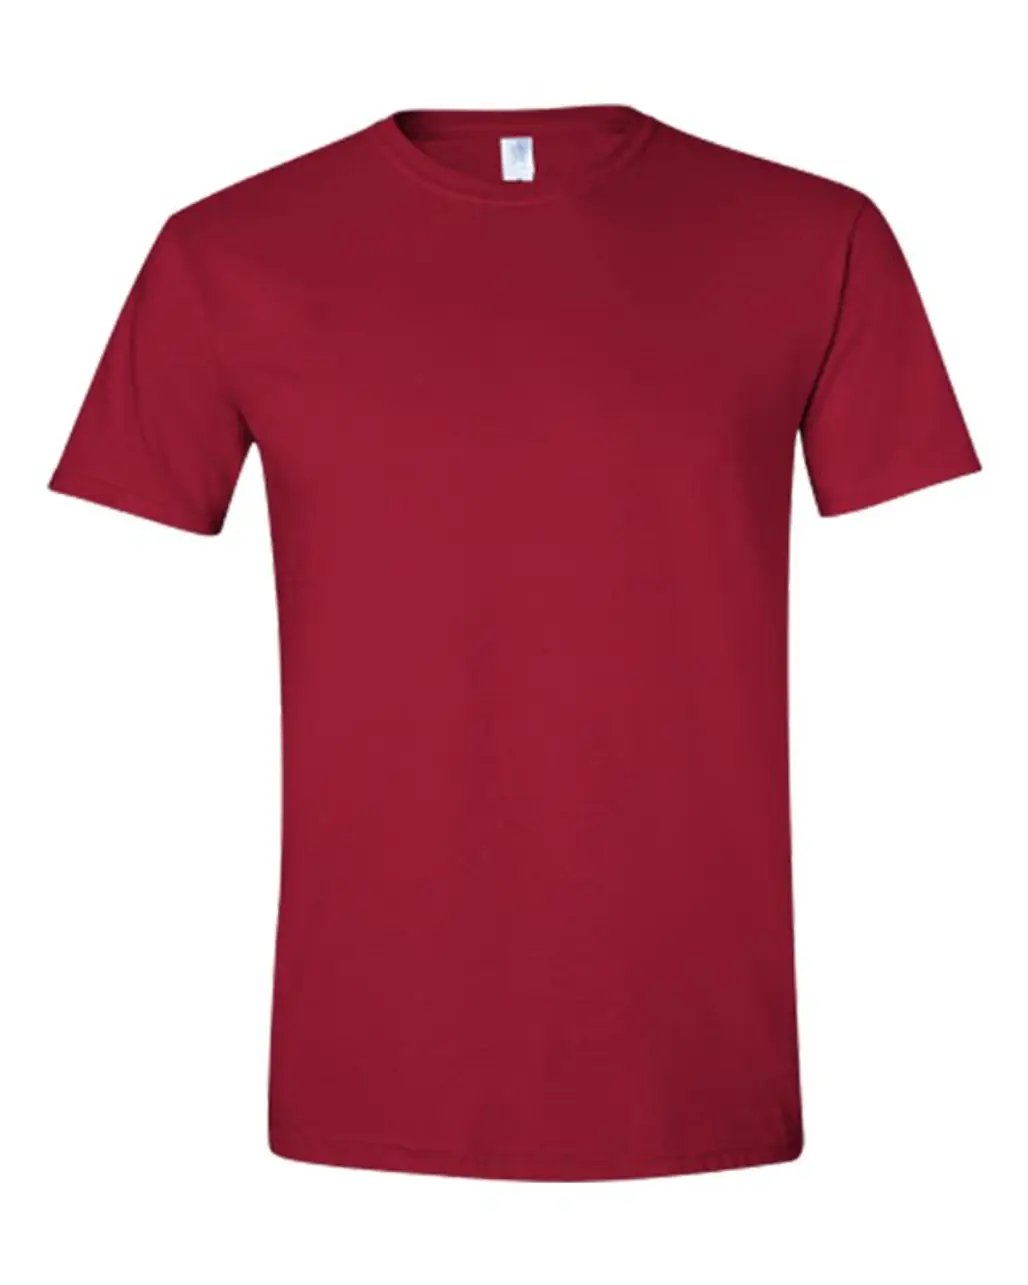 red, t shirt, sleeve, product, maroon,